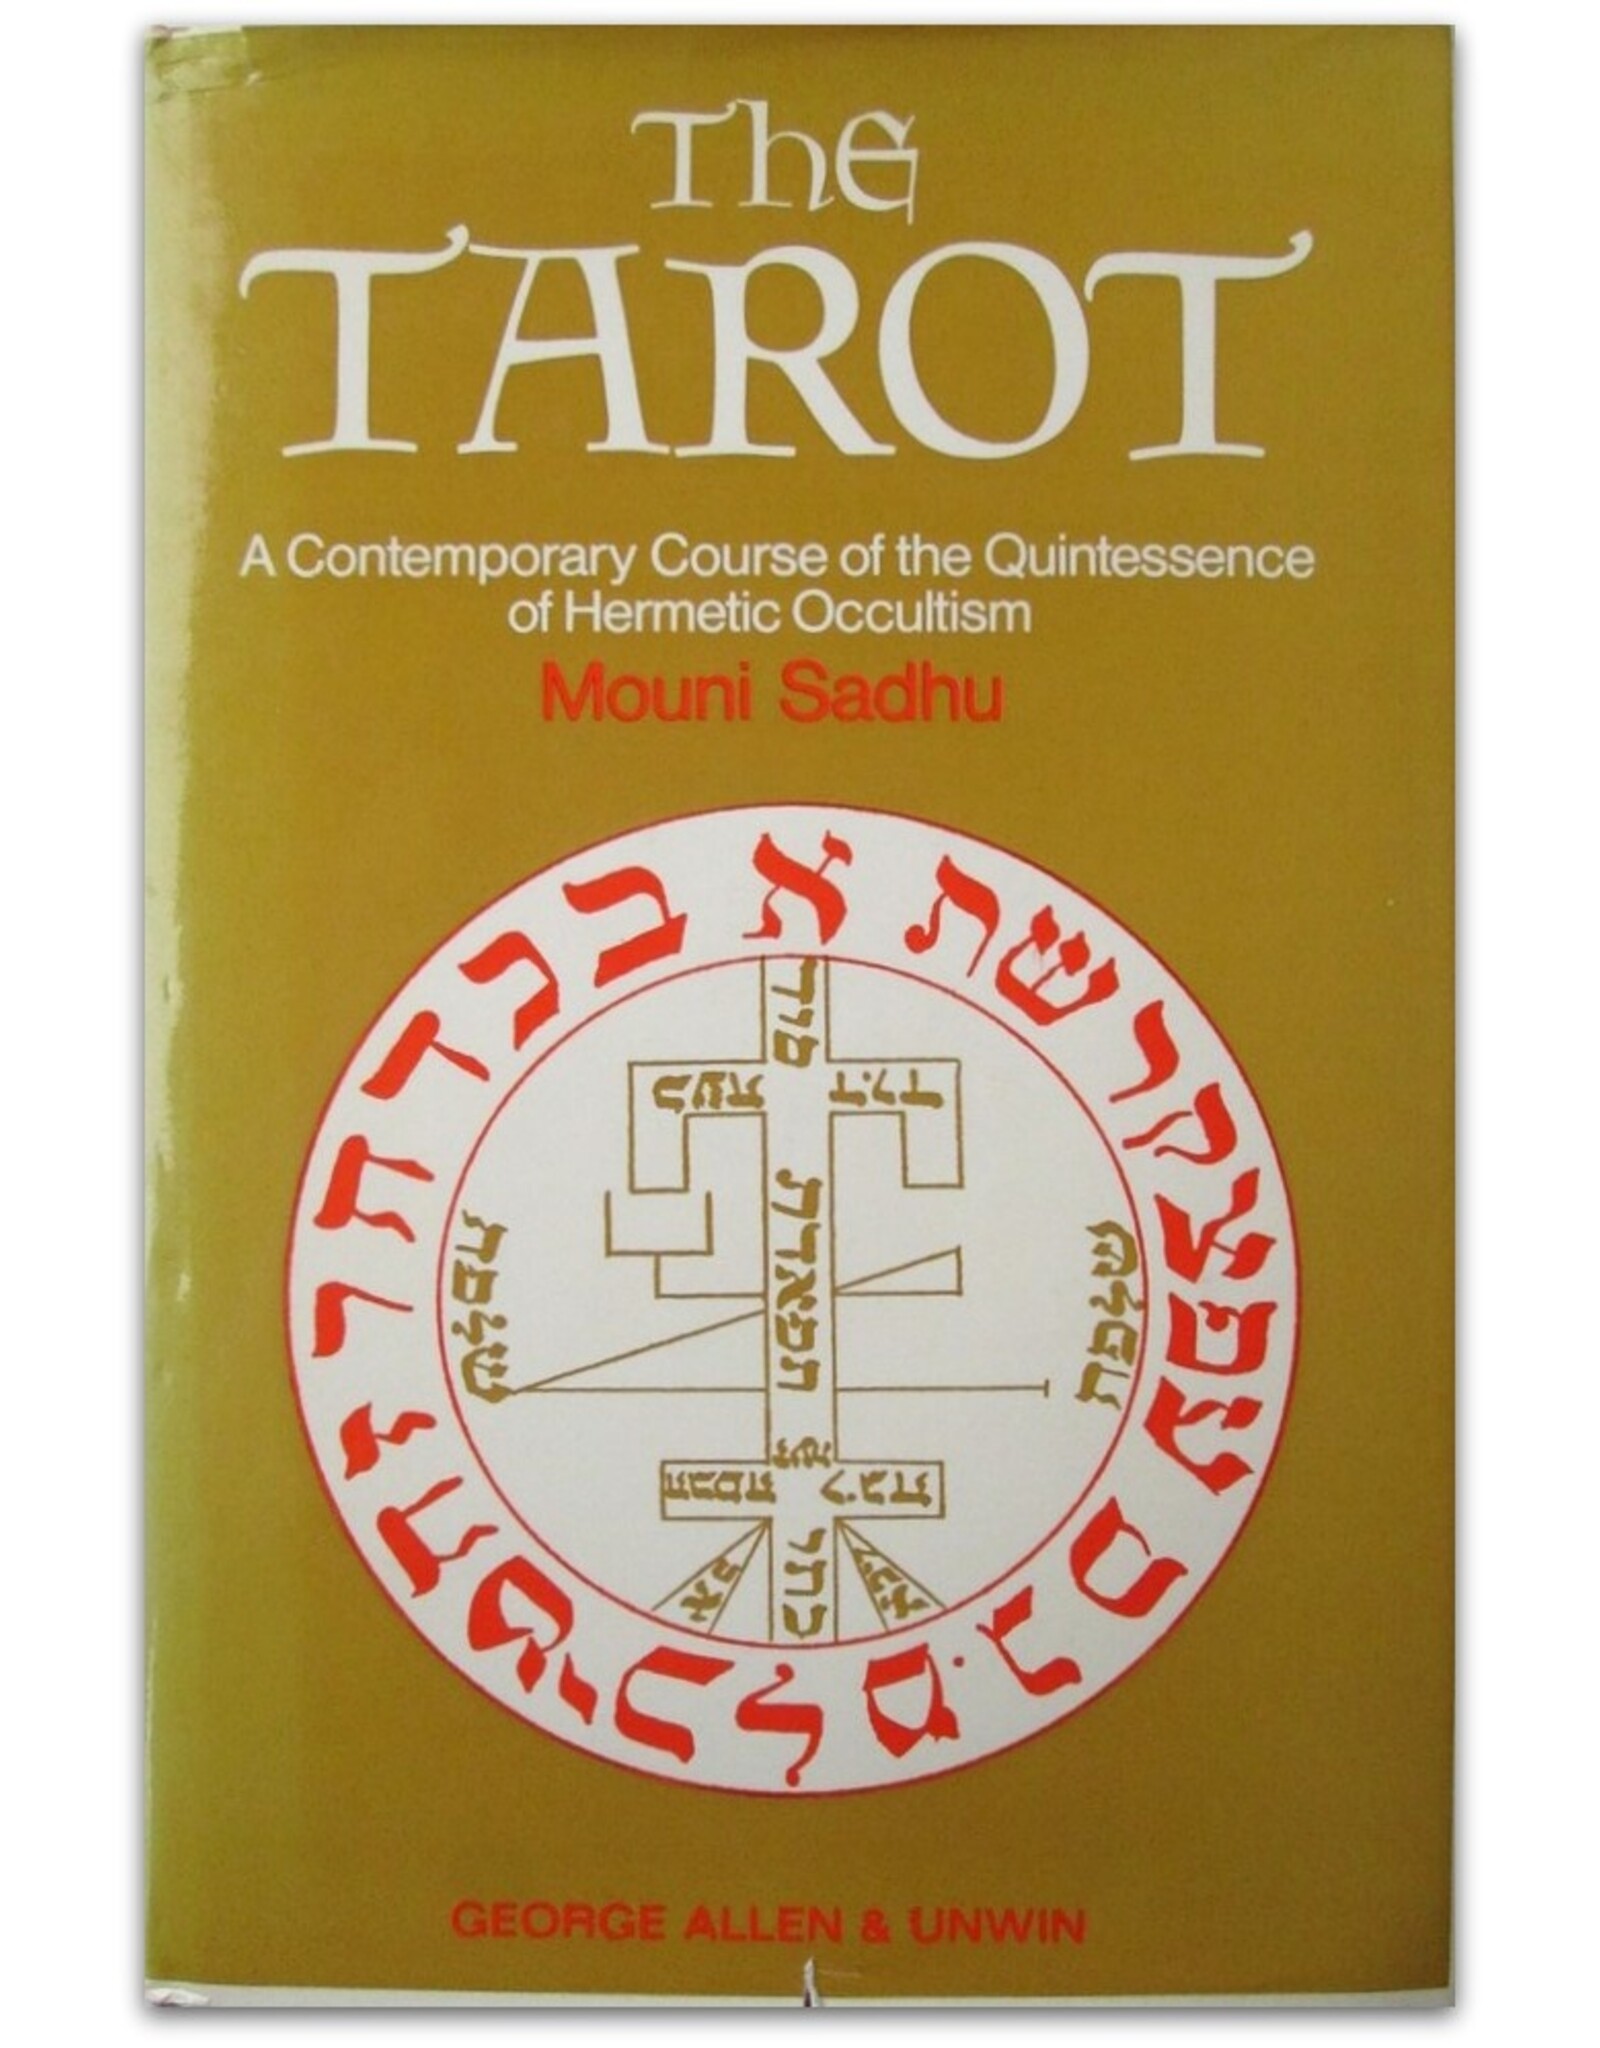 Mouni Sadhu - The Tarot. A Contemporary Course of the Quintessence of Hermetic Occultism